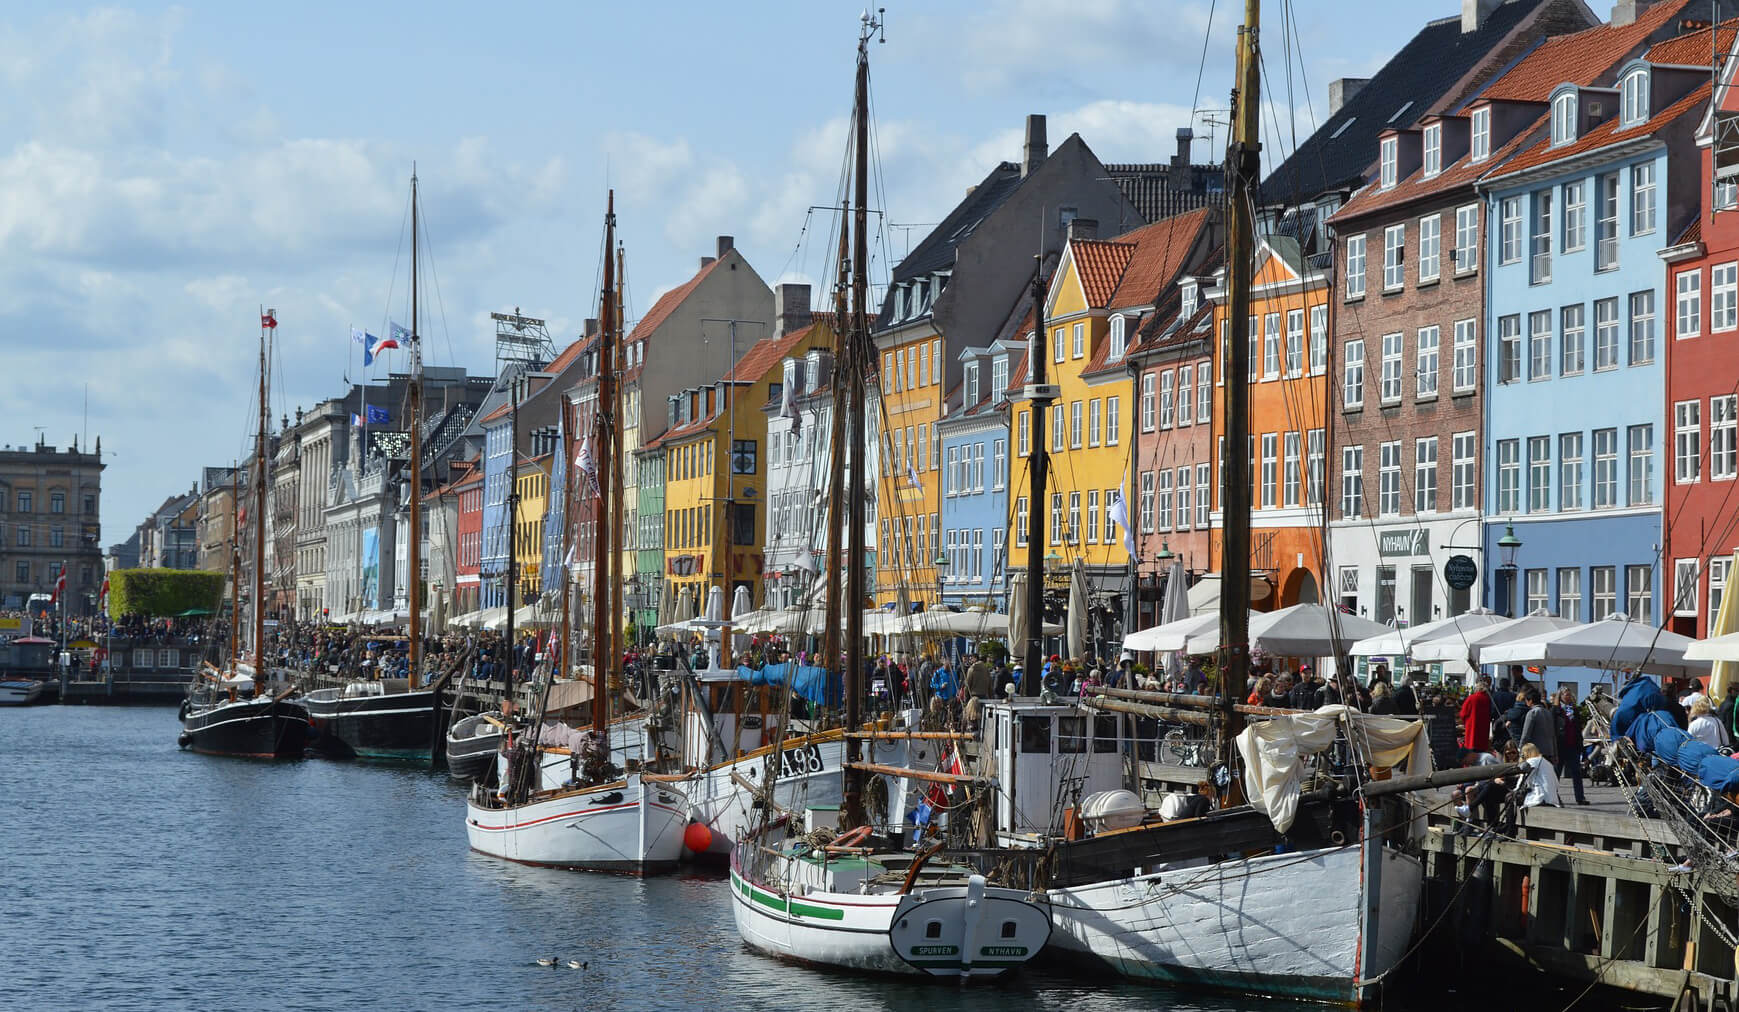 View of Copenhagen houses across a river with boats